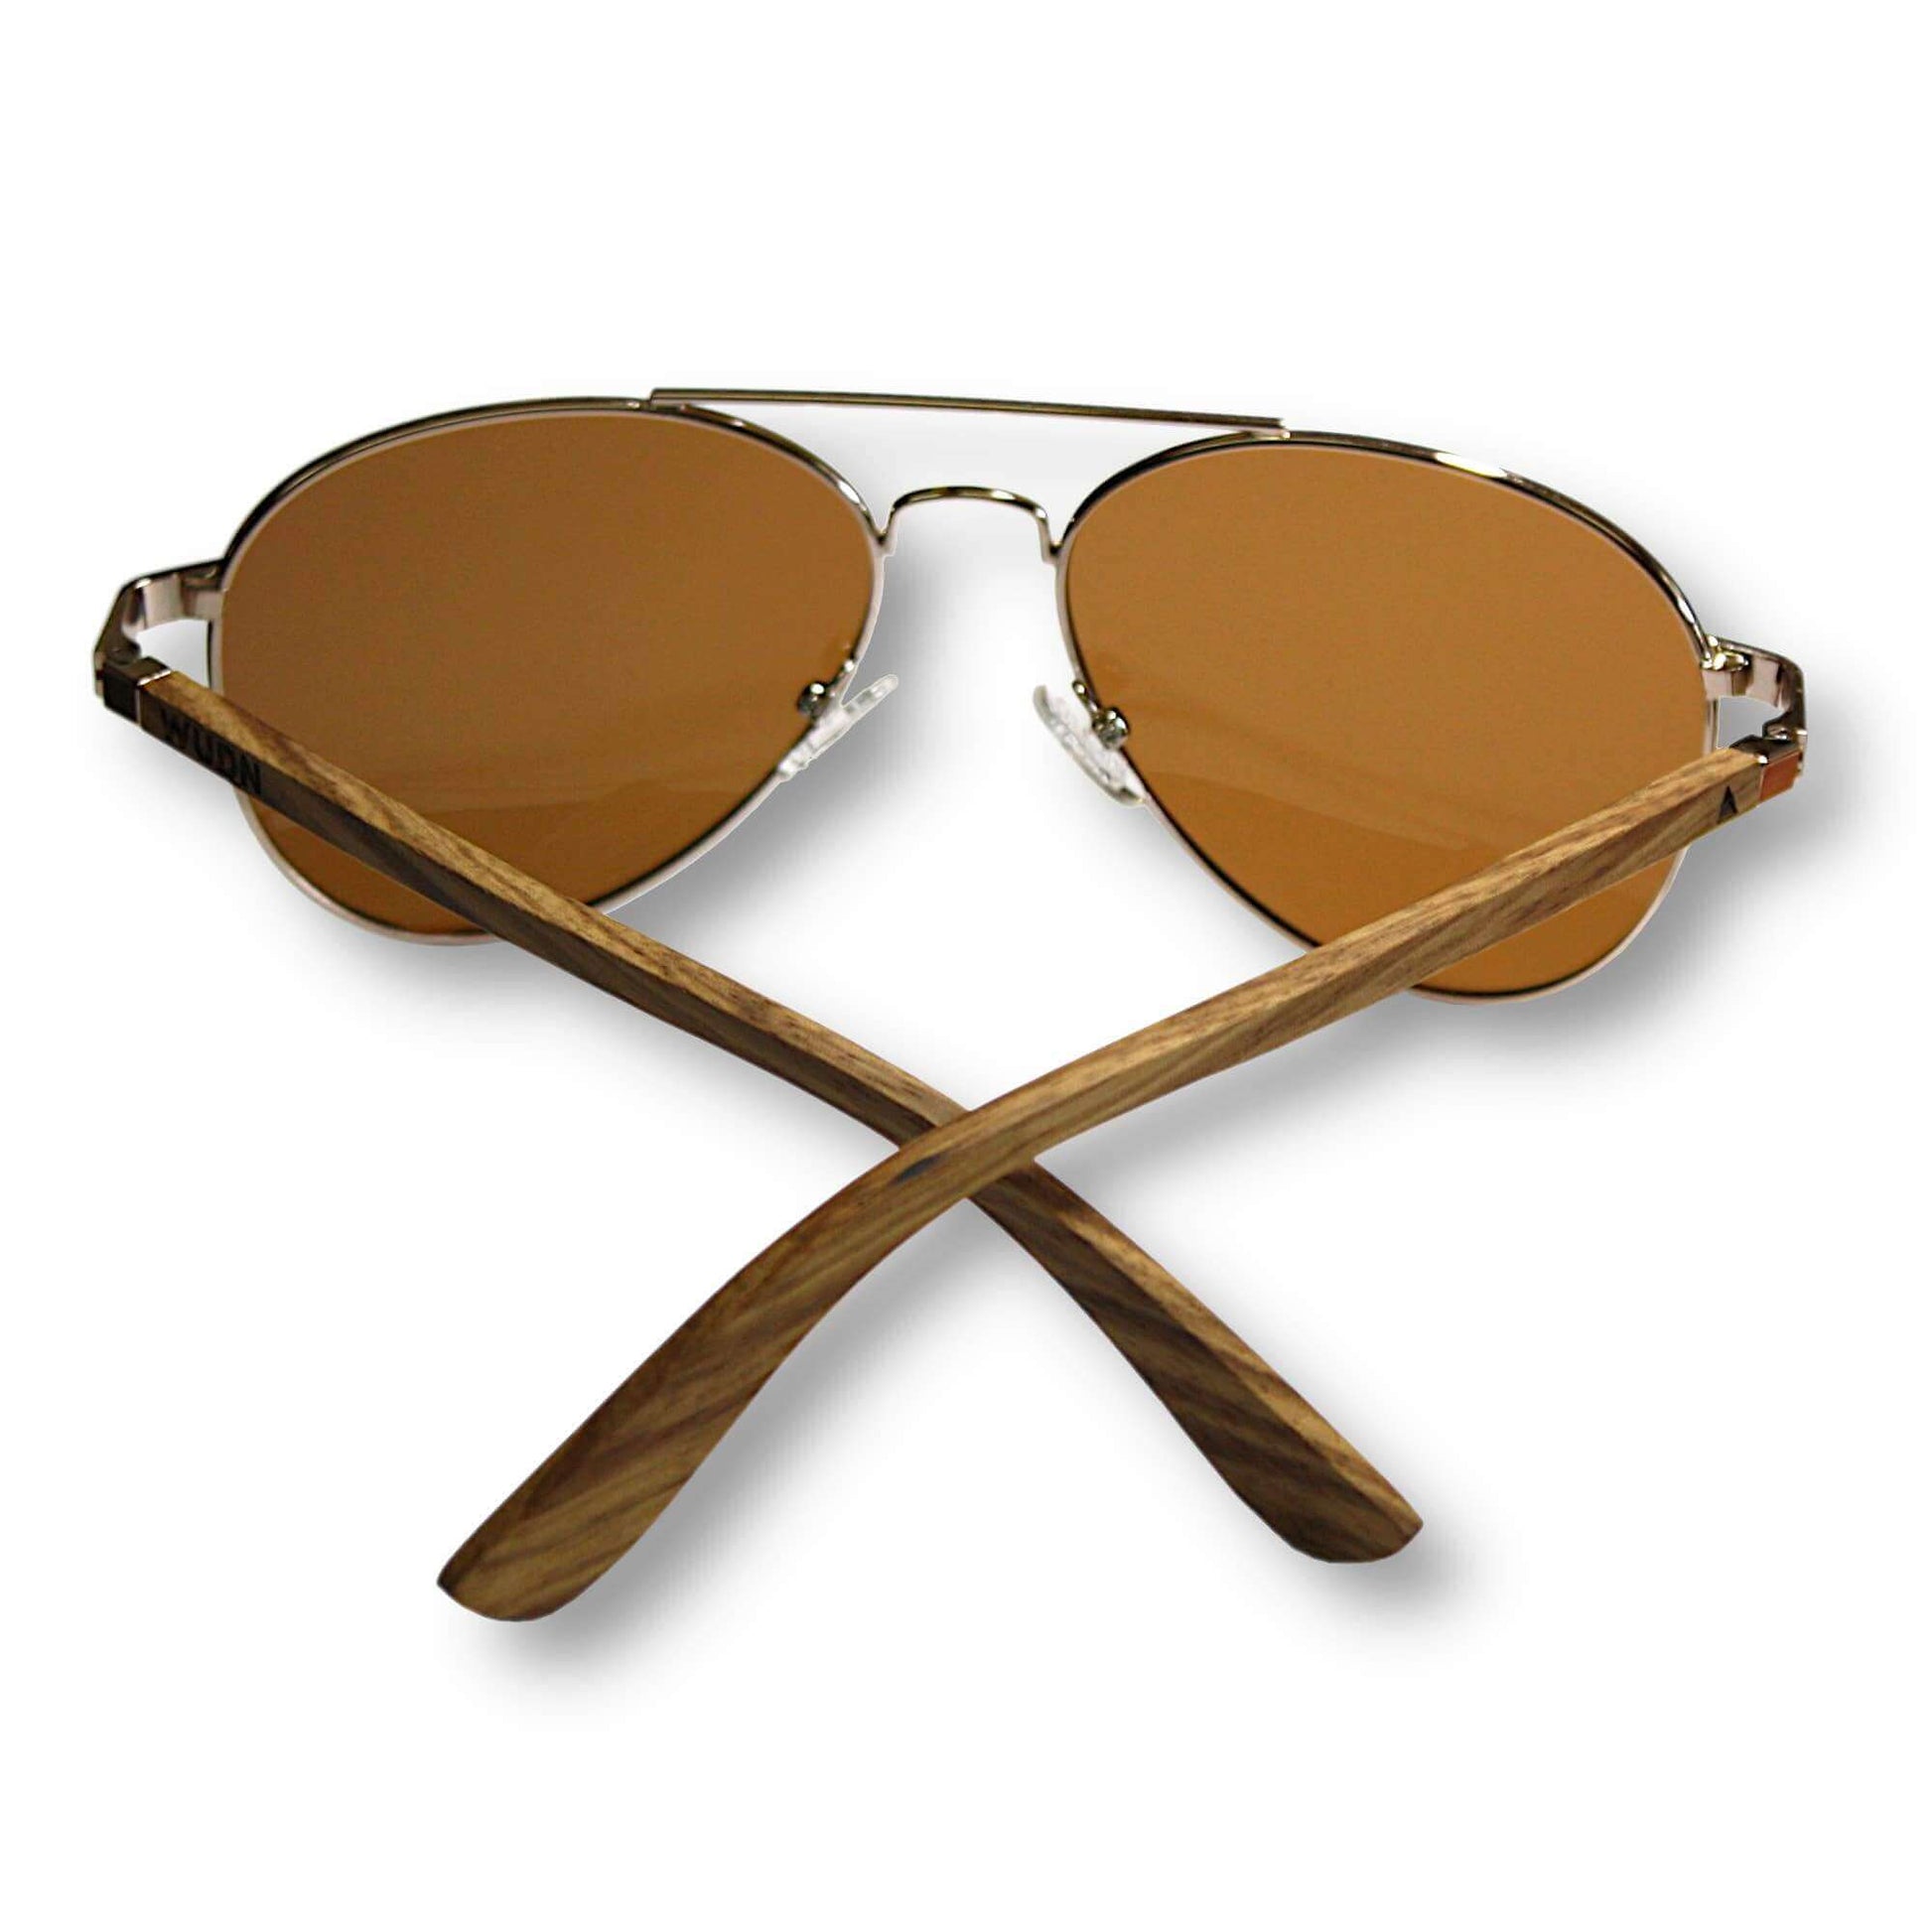 Suede Brown Silver Framed Classic Aviators by WUDN folded